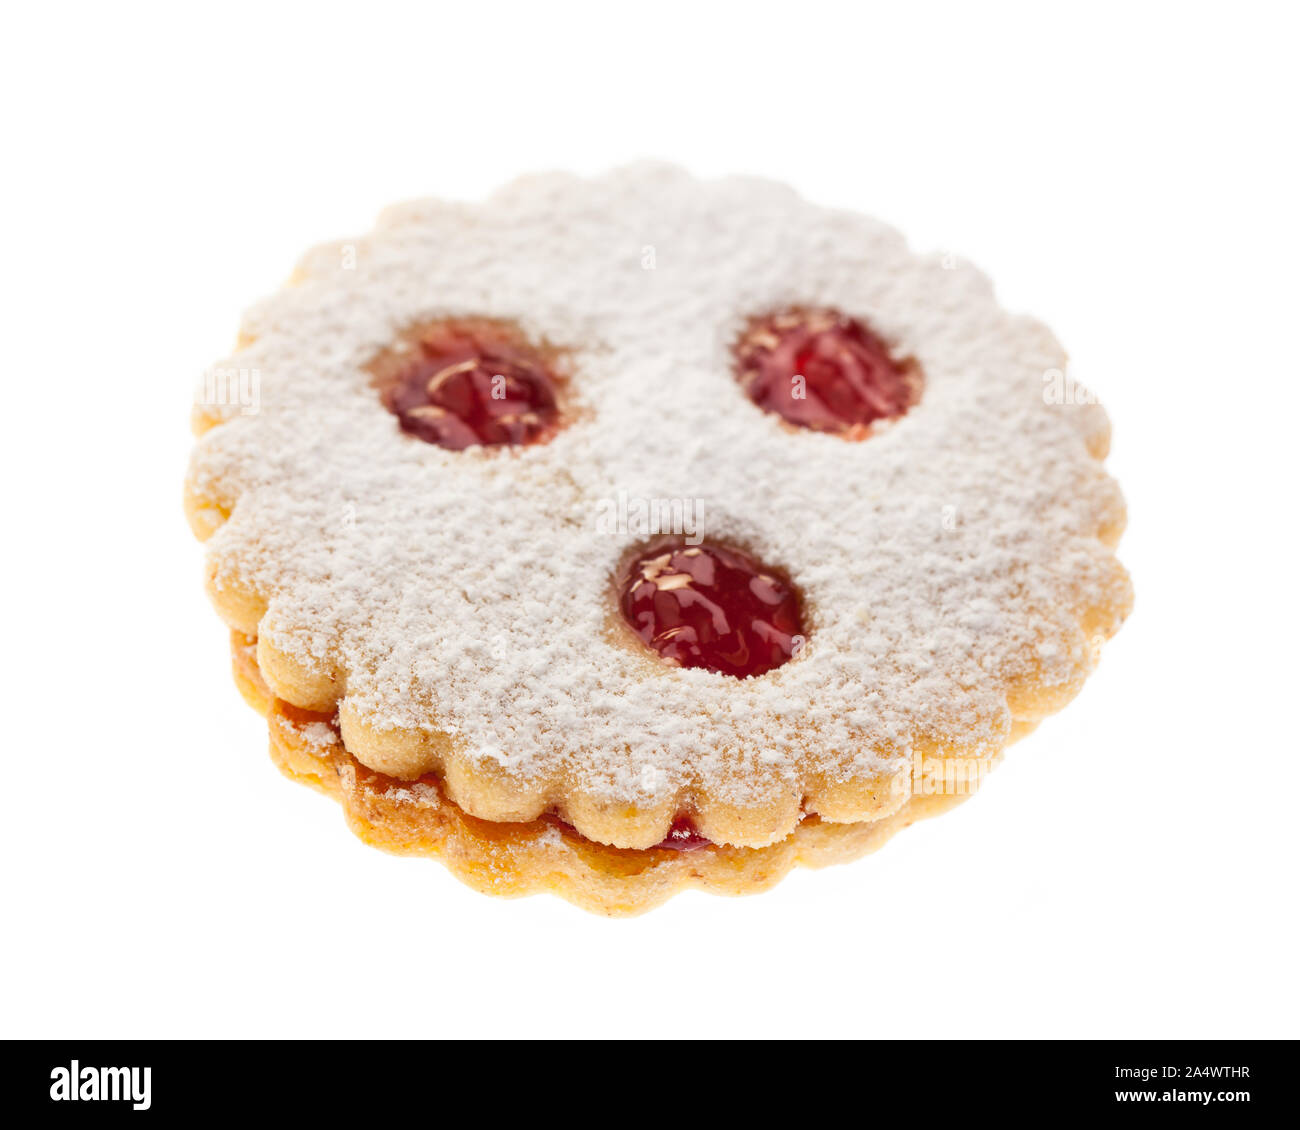 Christmas pastries: Linzer eyes ( 'Linzer Augen') from the front on a white background Stock Photo